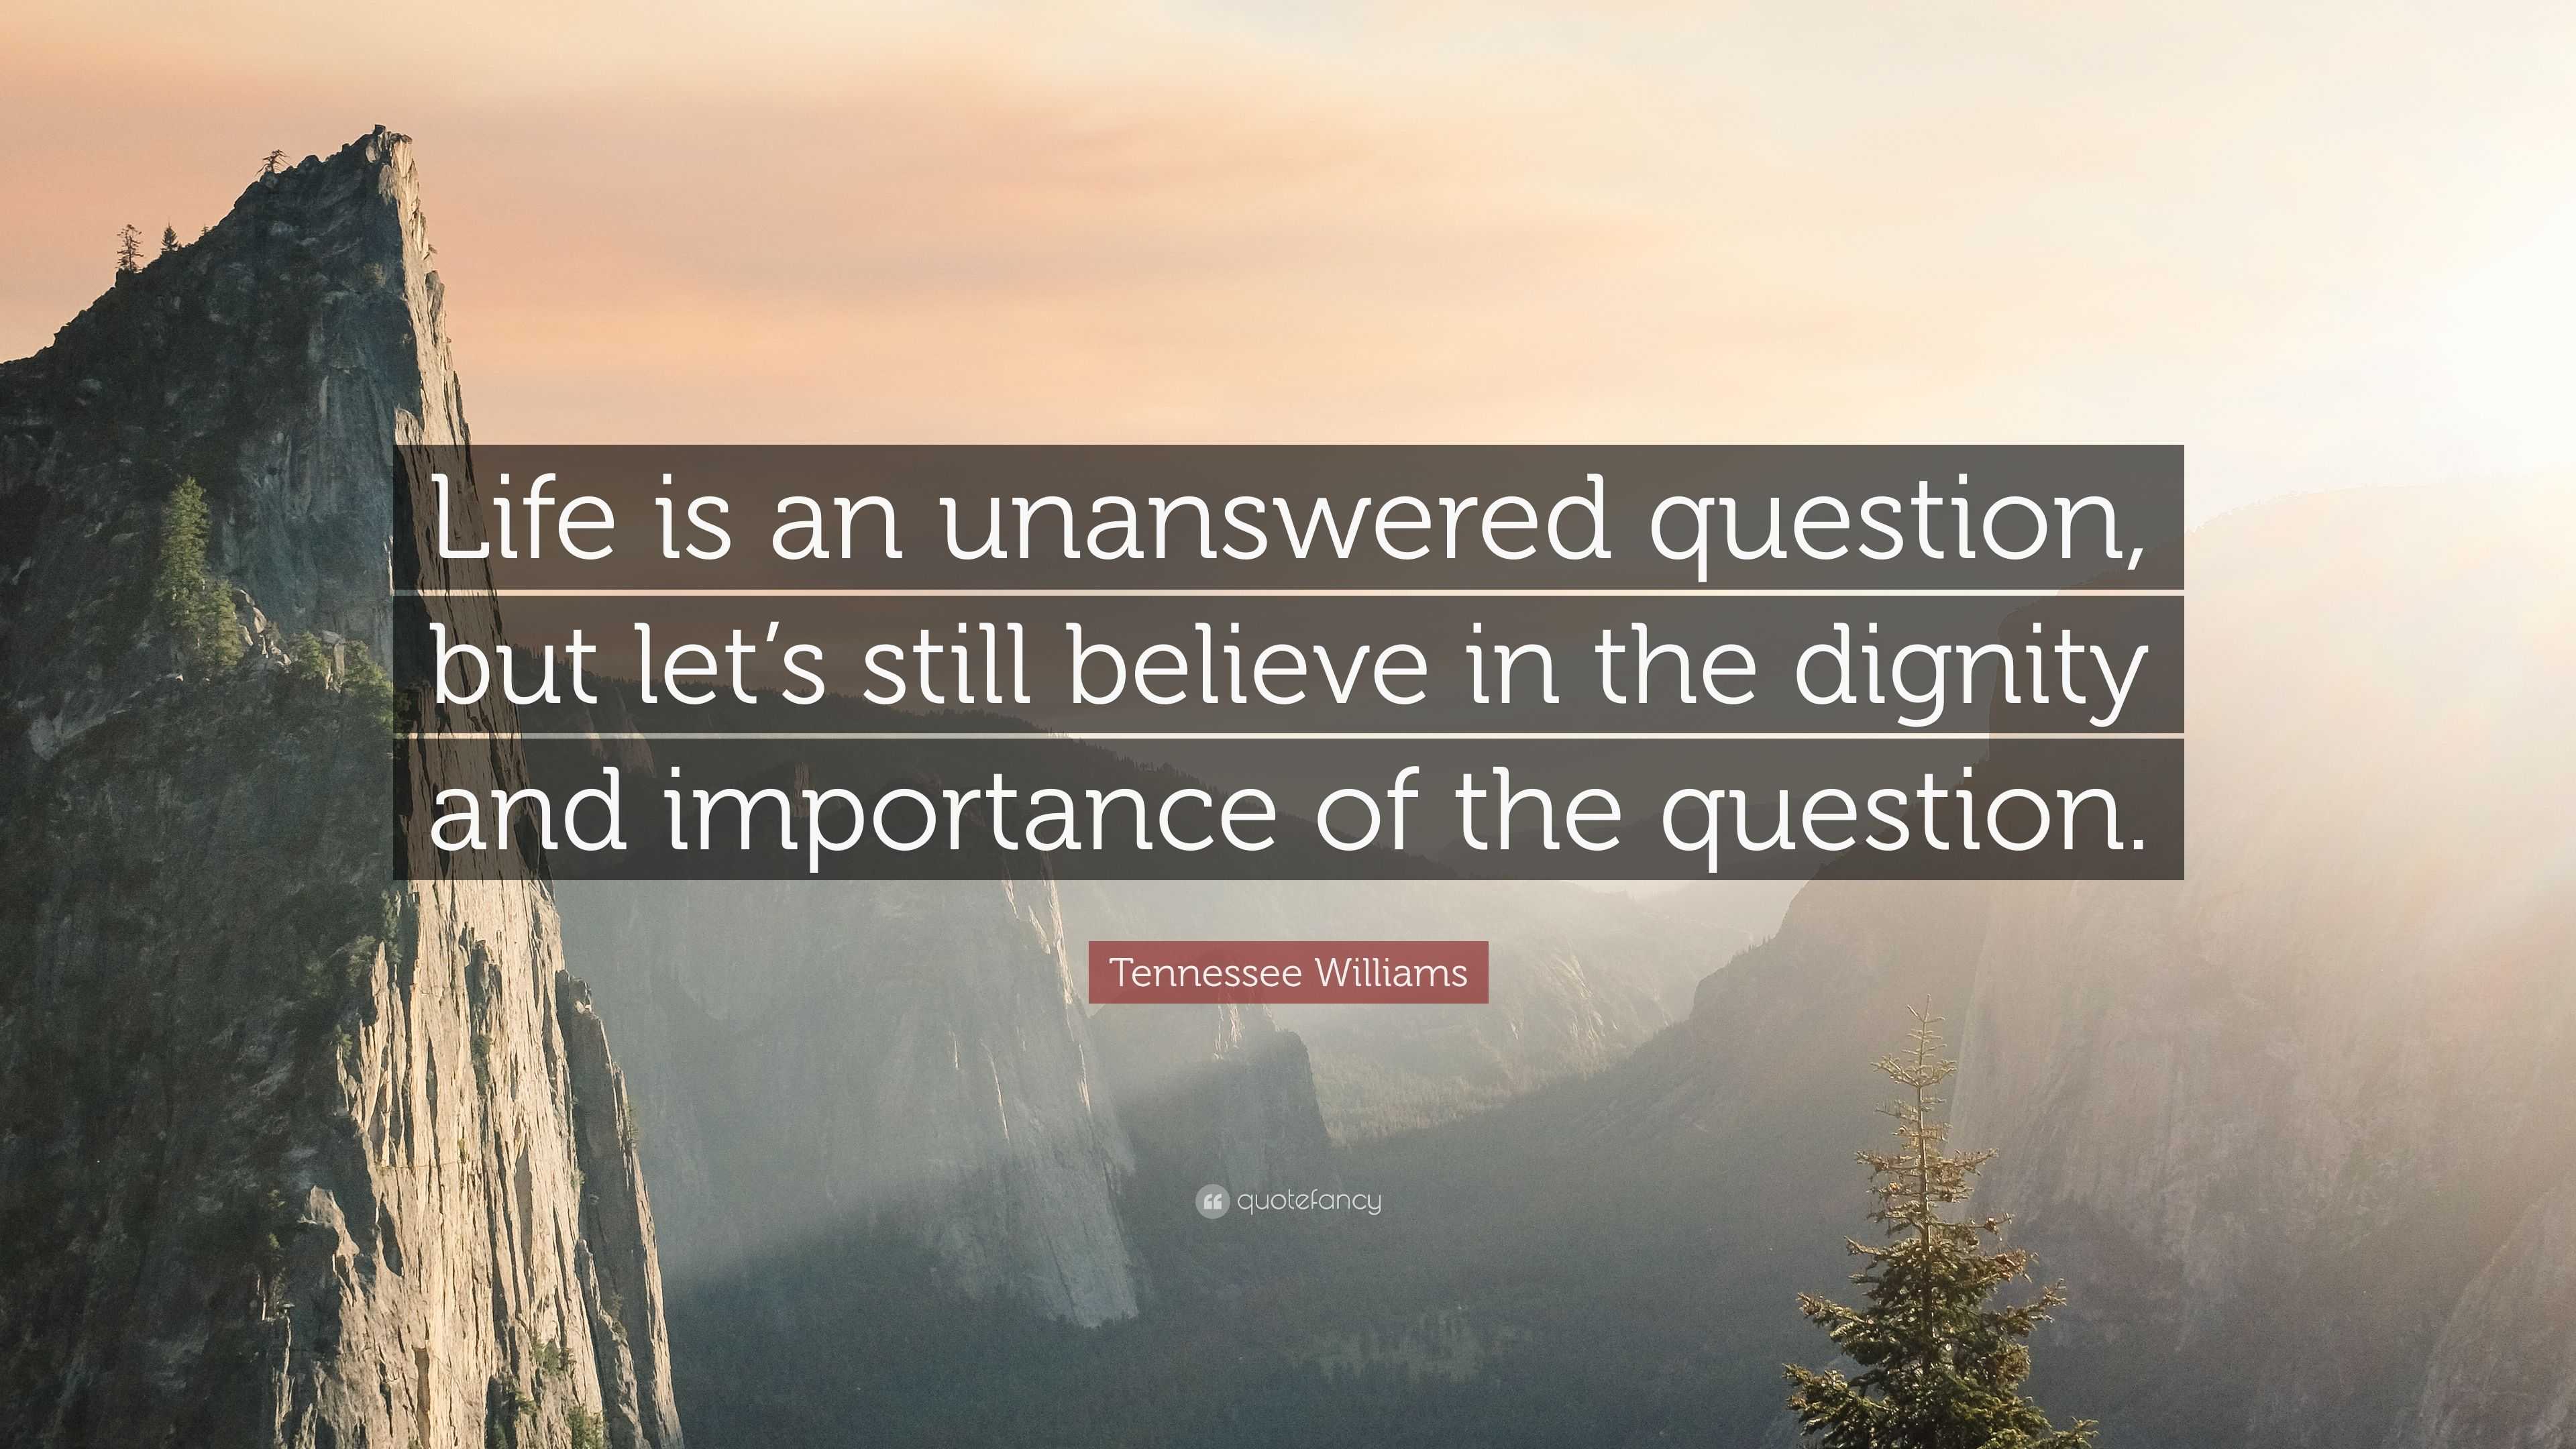 Tennessee Williams Quote: "Life is an unanswered question ...